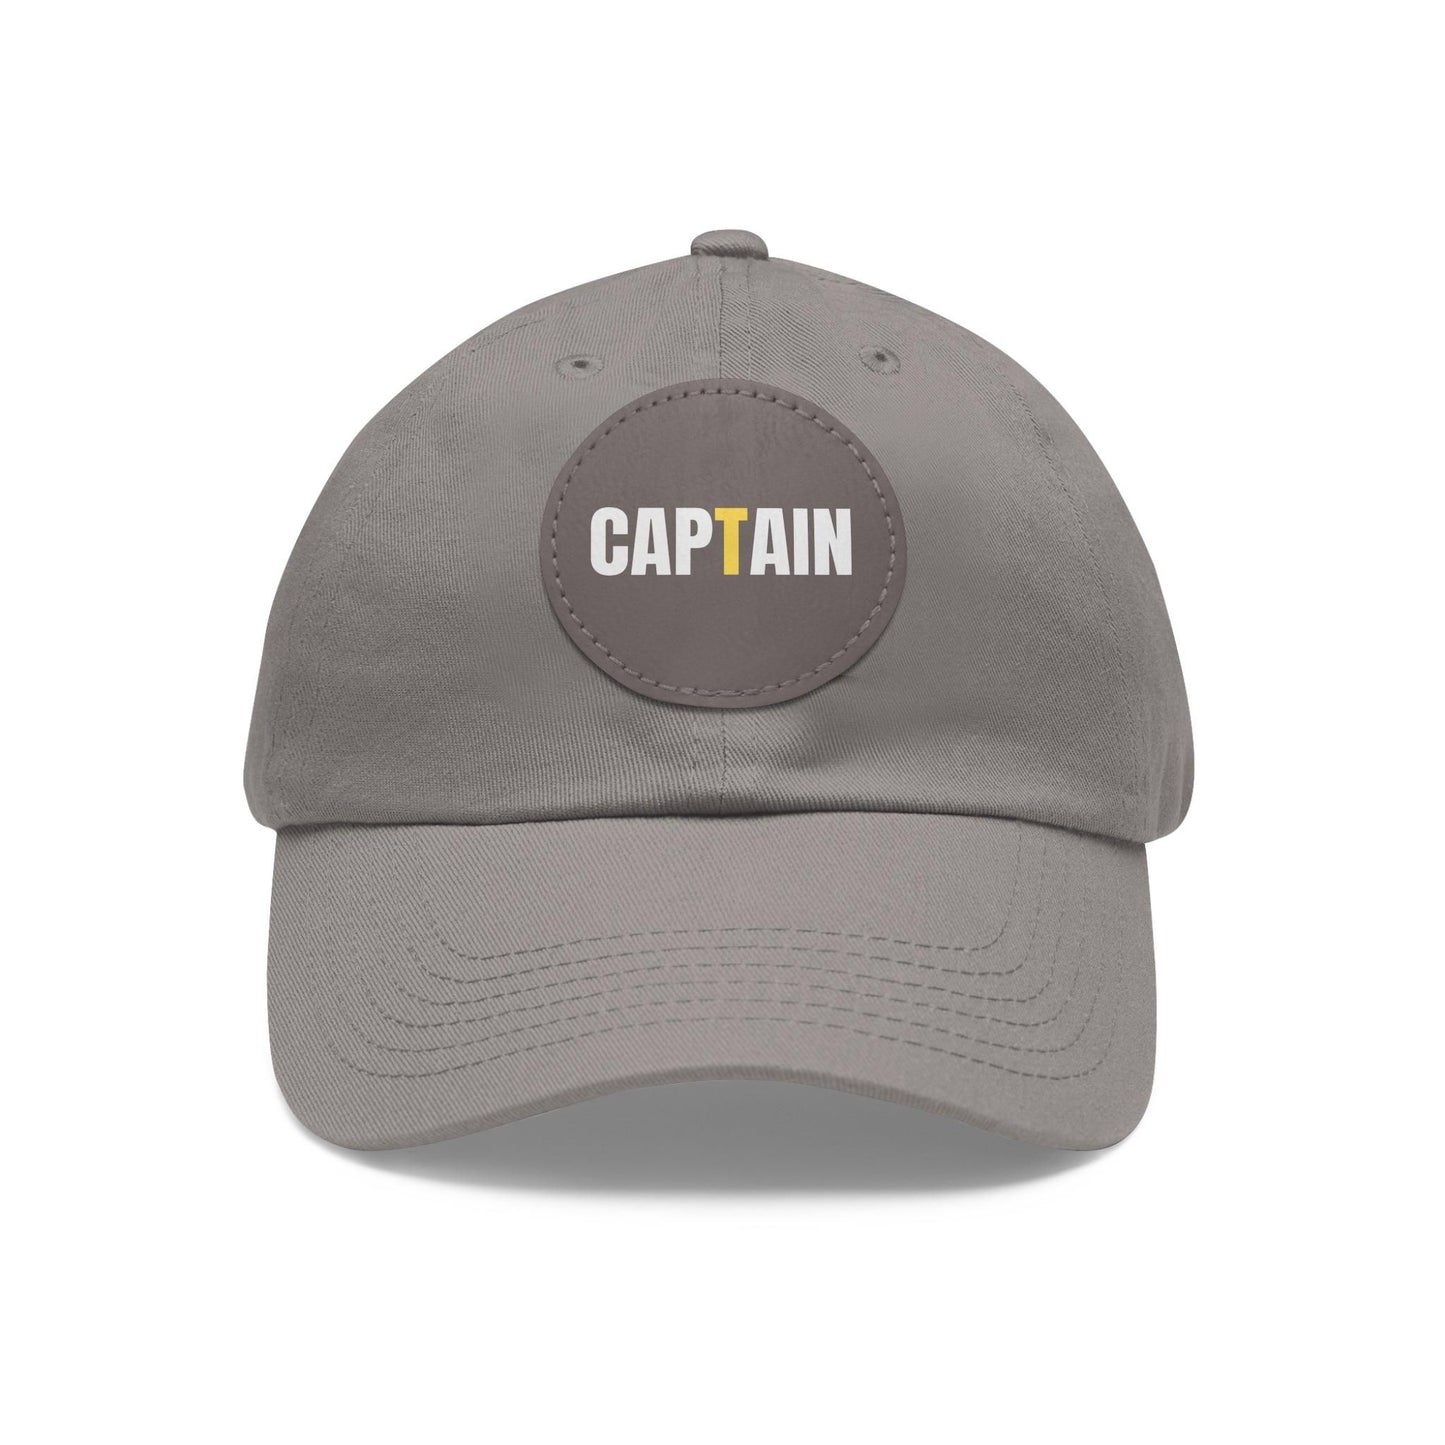 Captain Baseball Hat with Leather Patch Cap Grey / Grey patch Circle One size